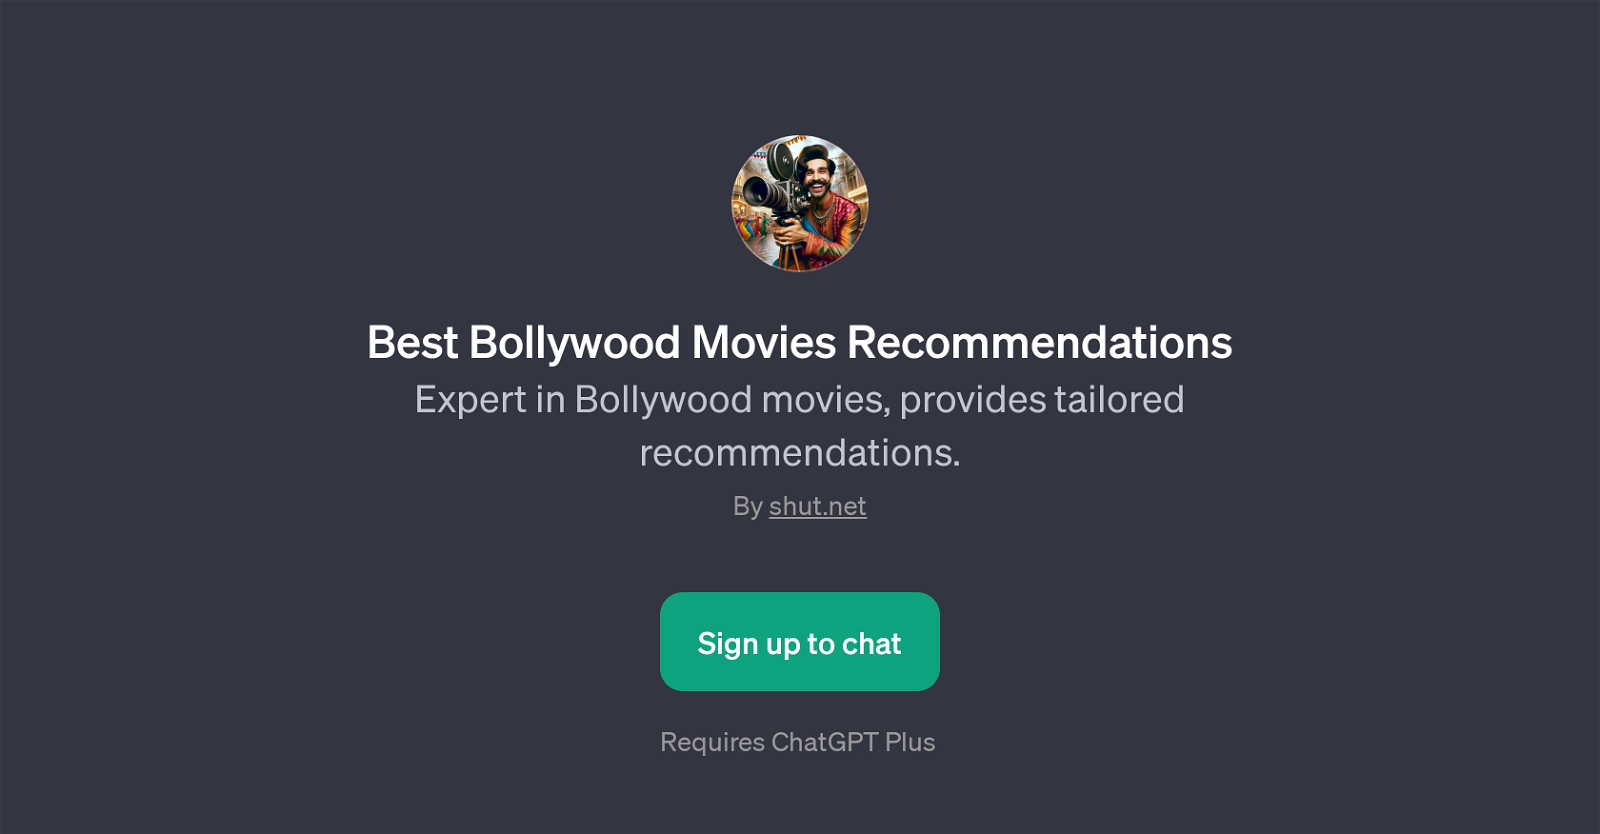 Best Bollywood Movies Recommendations website